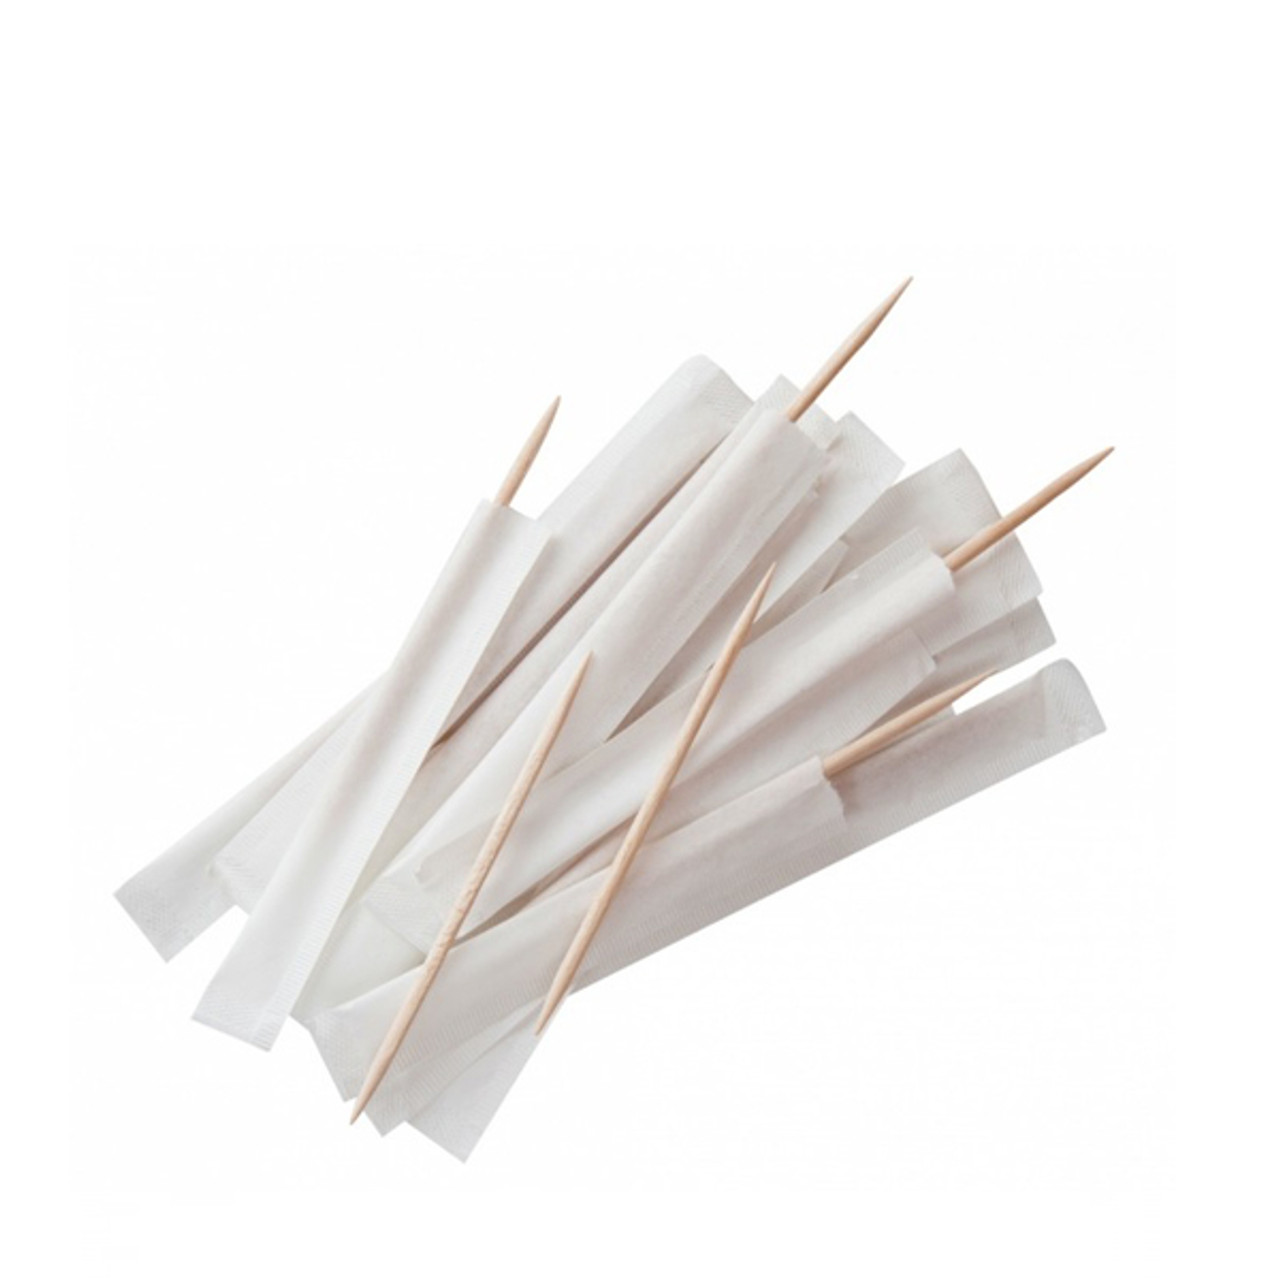 Wrapped Wooden Toothpicks, Case of 1000